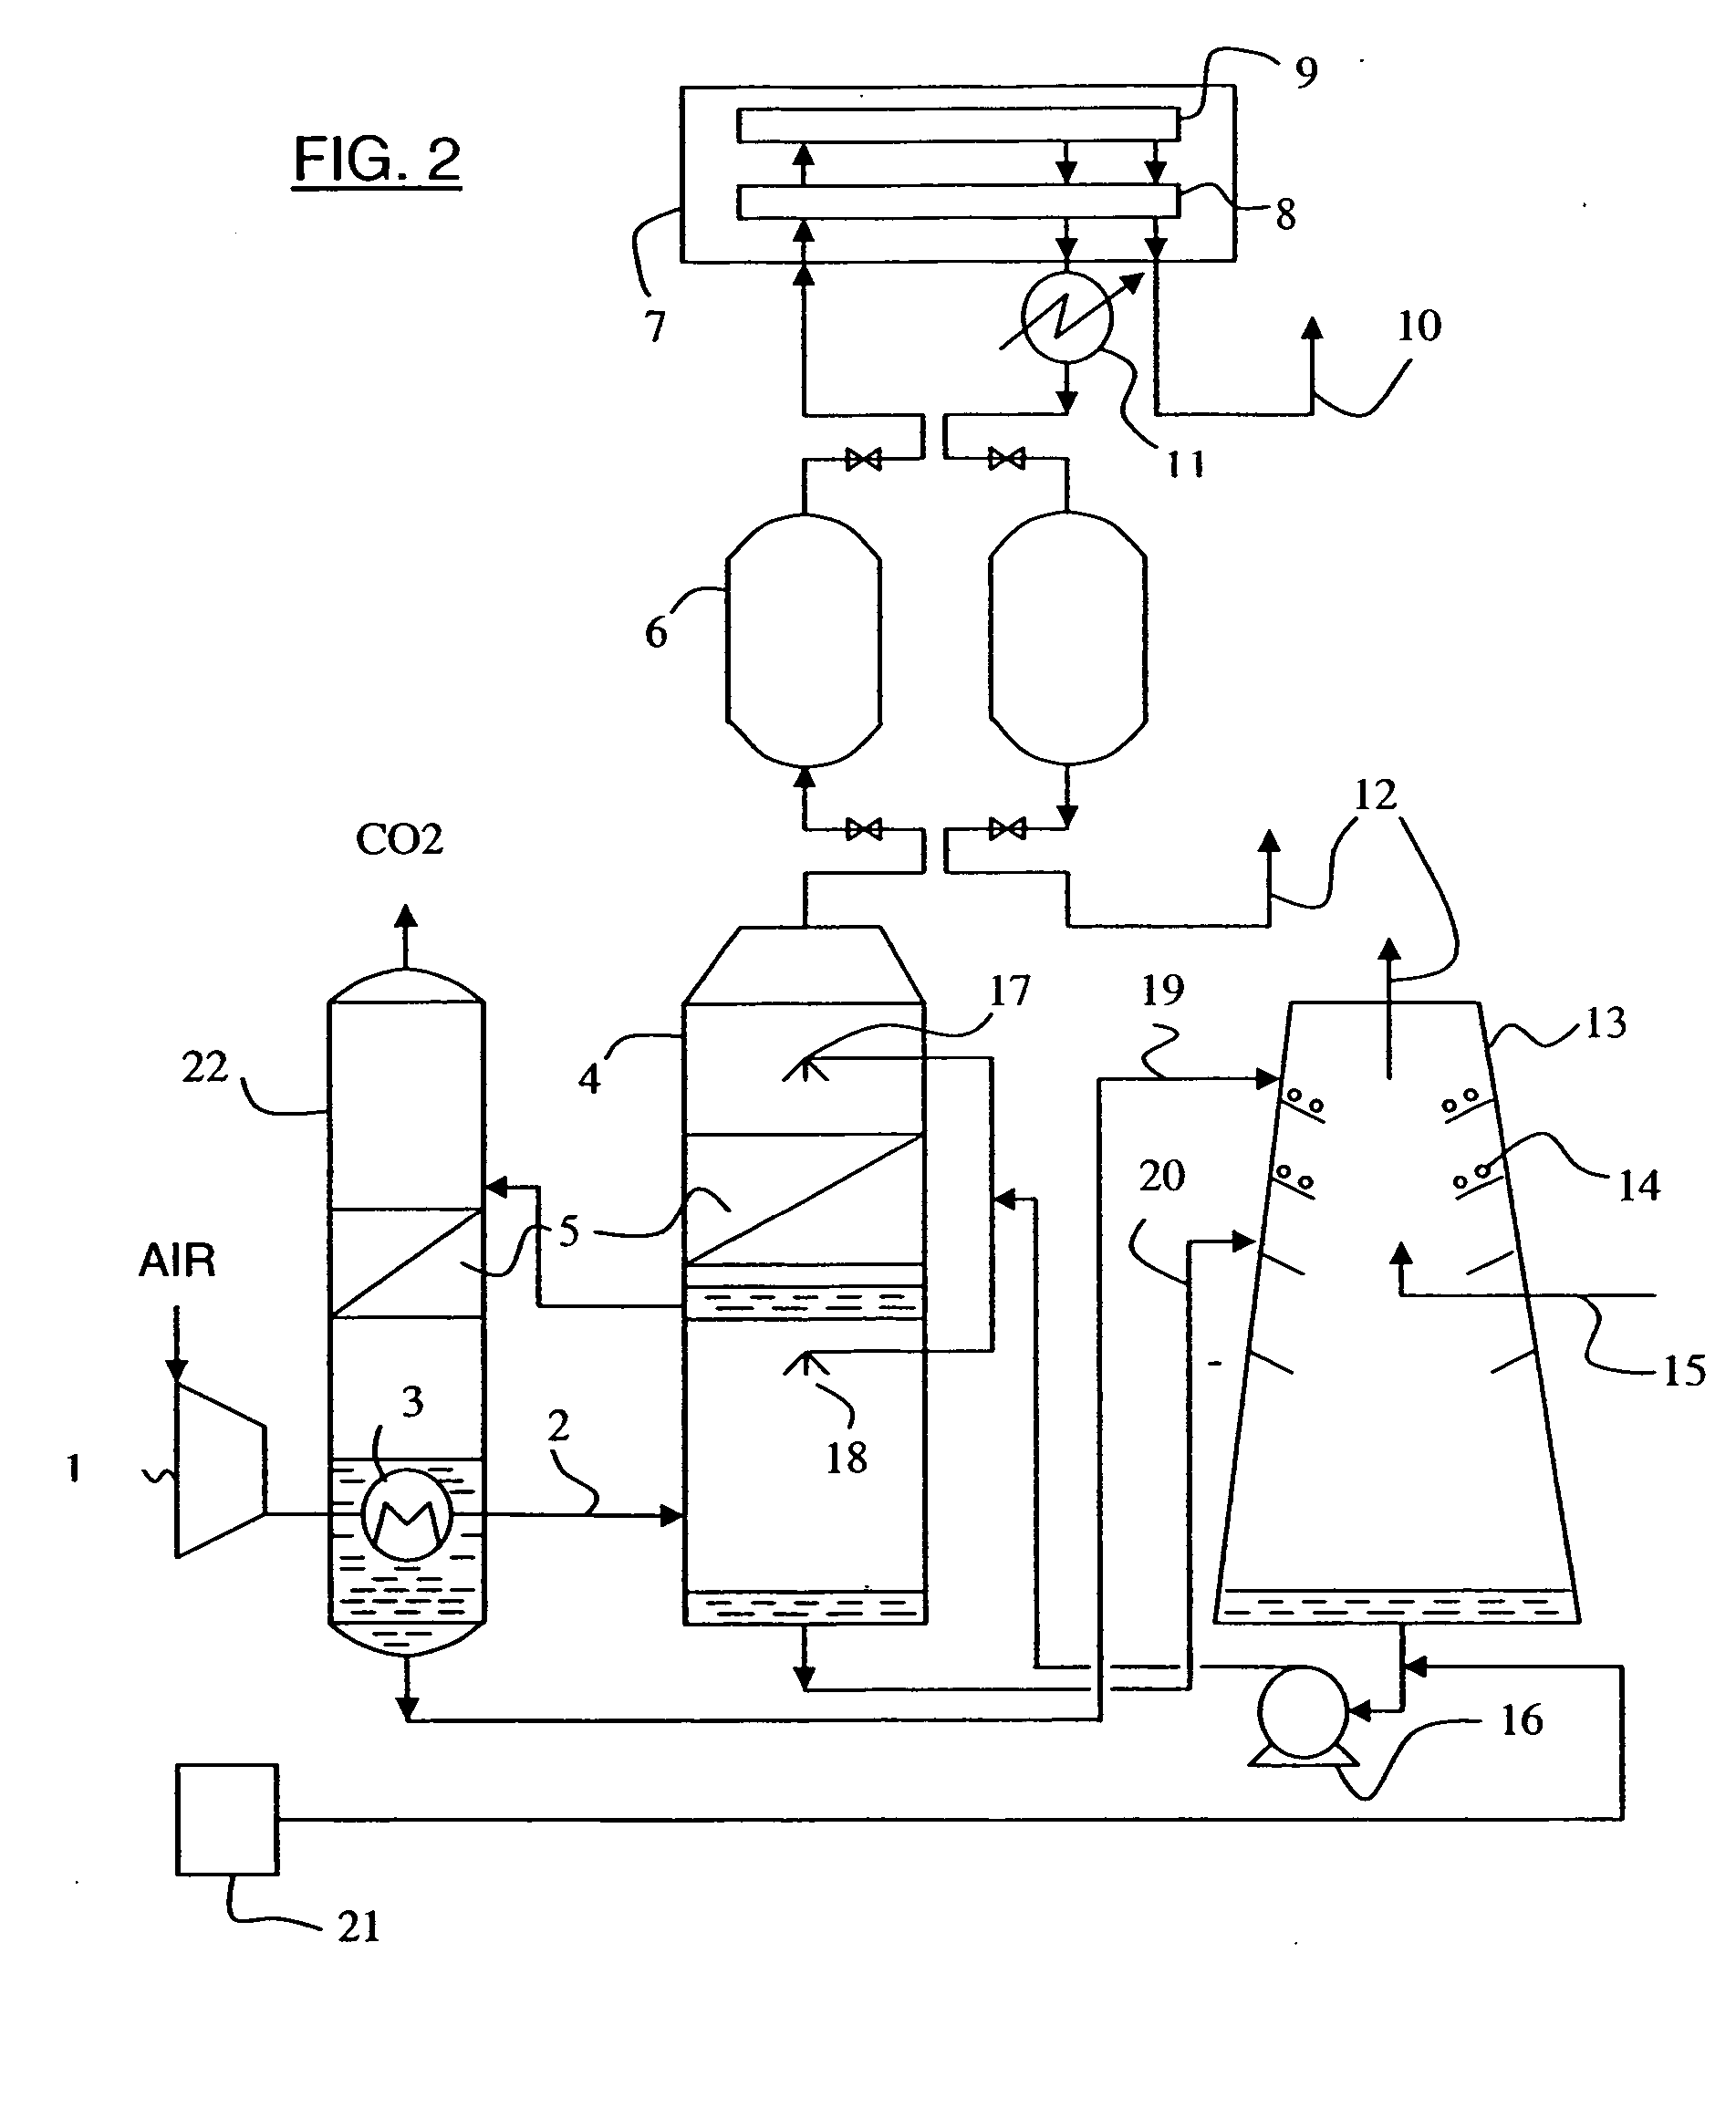 Process and installation for the fractionation of air into specific gases